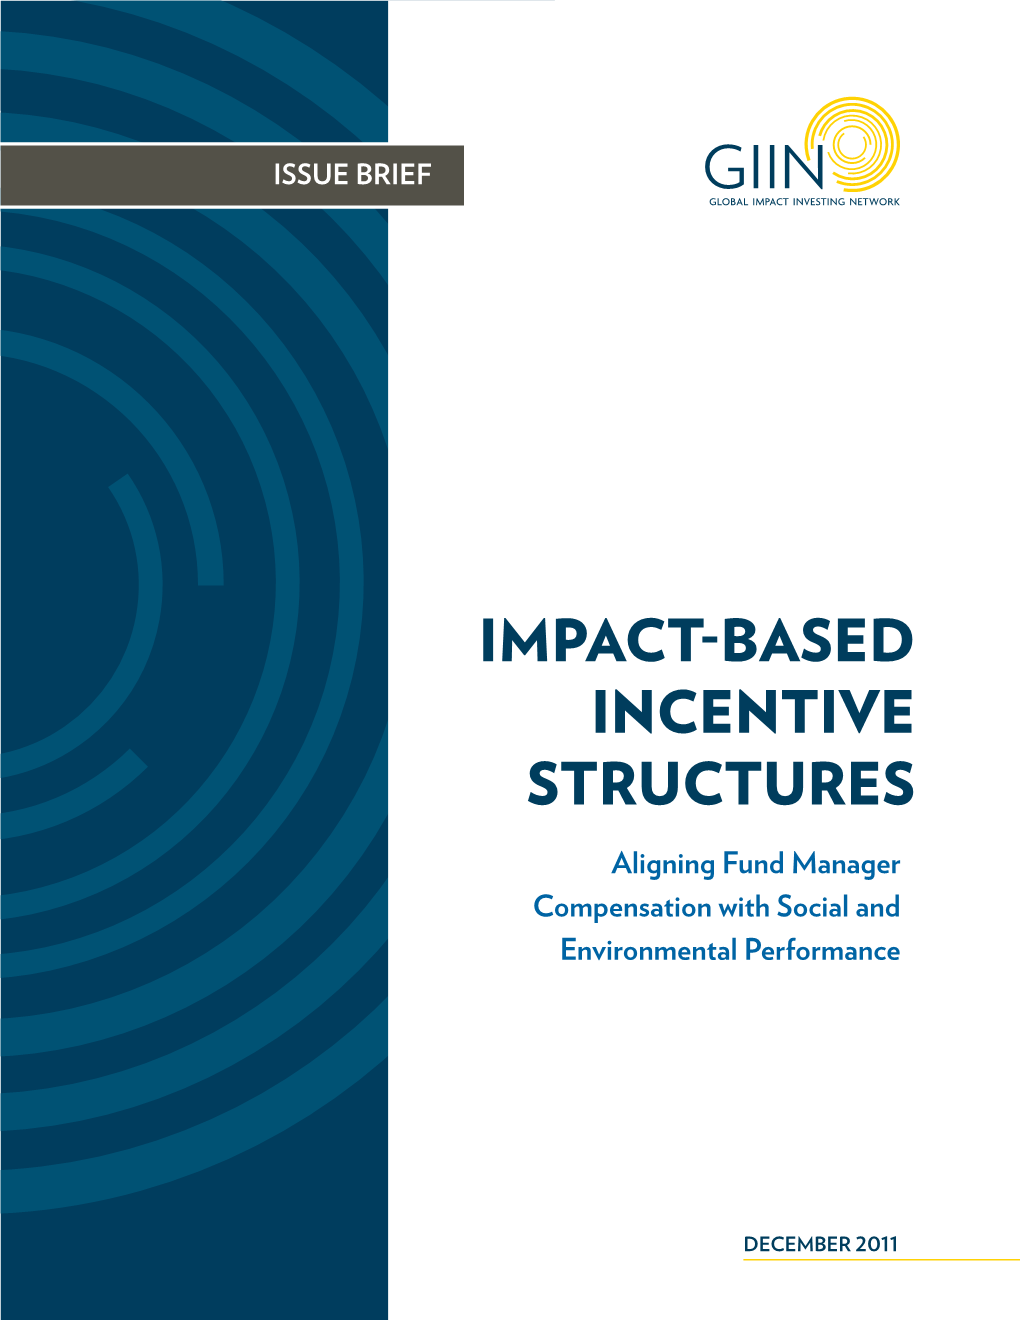 Impact-Based Incentive Structures, GIIN